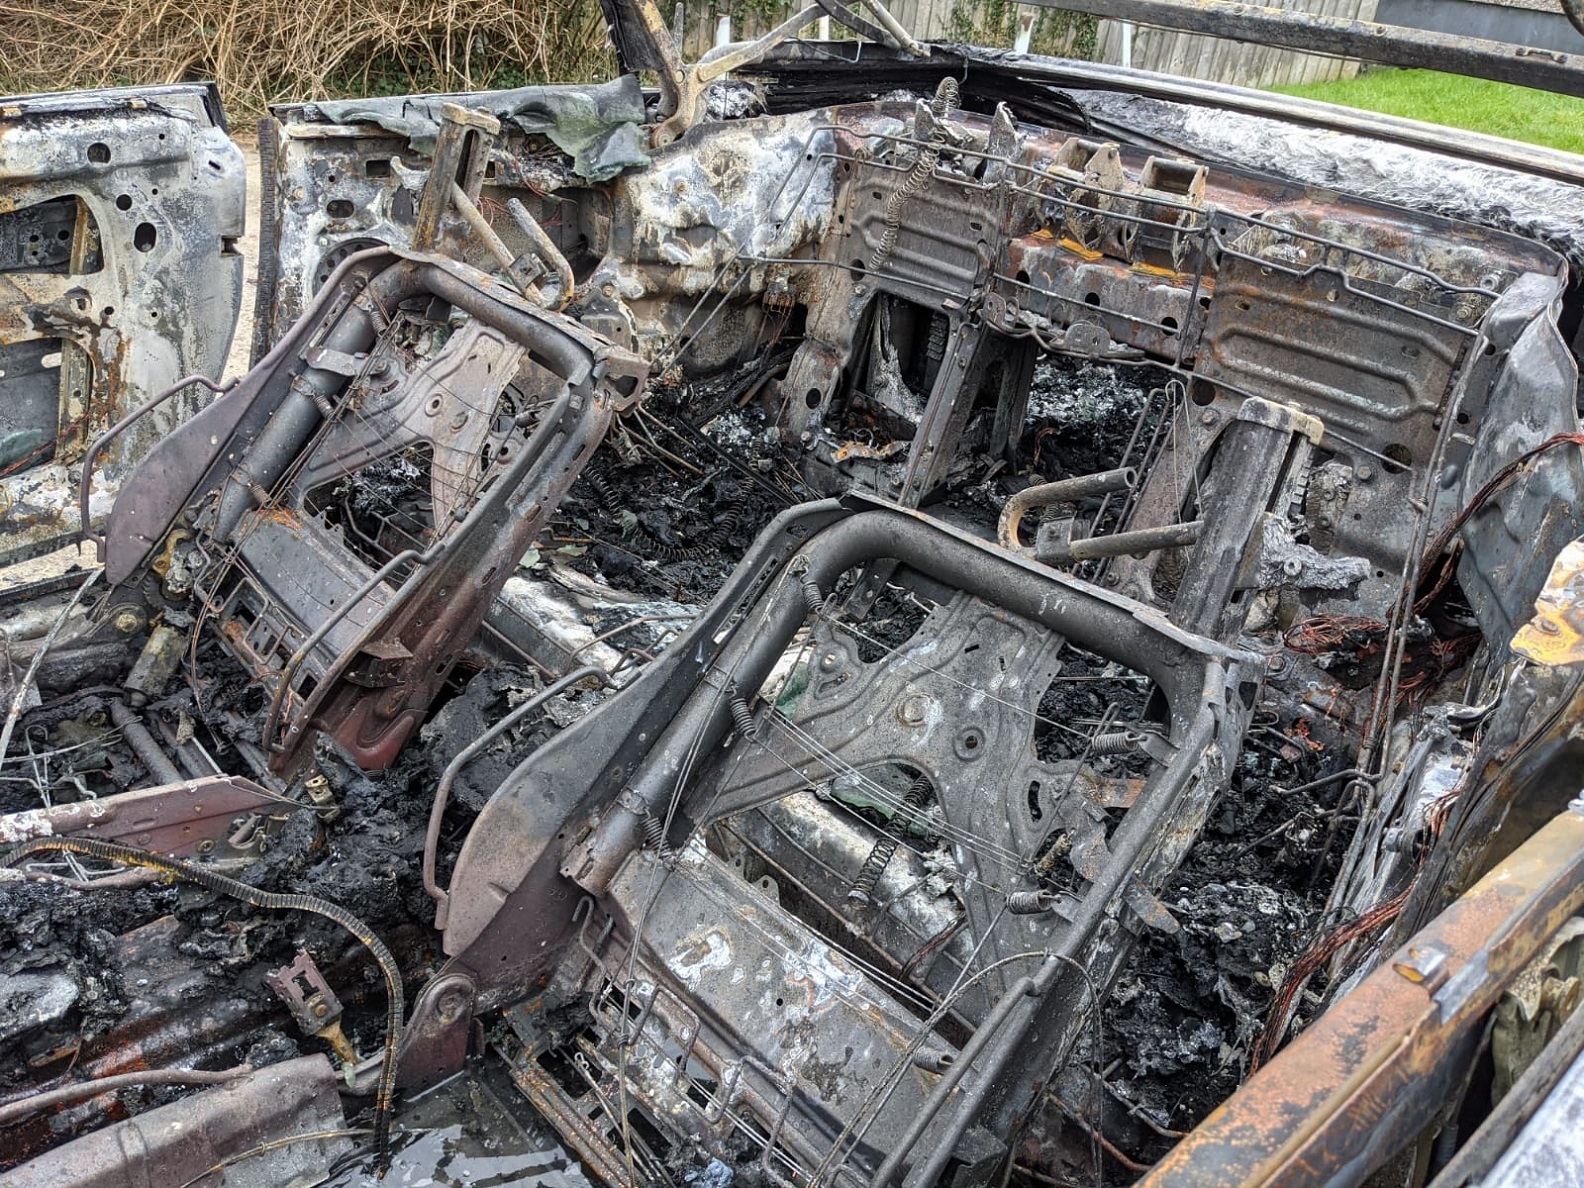 A car which had been set alight on Clifton Square in Griffithstown on Sunday night. 